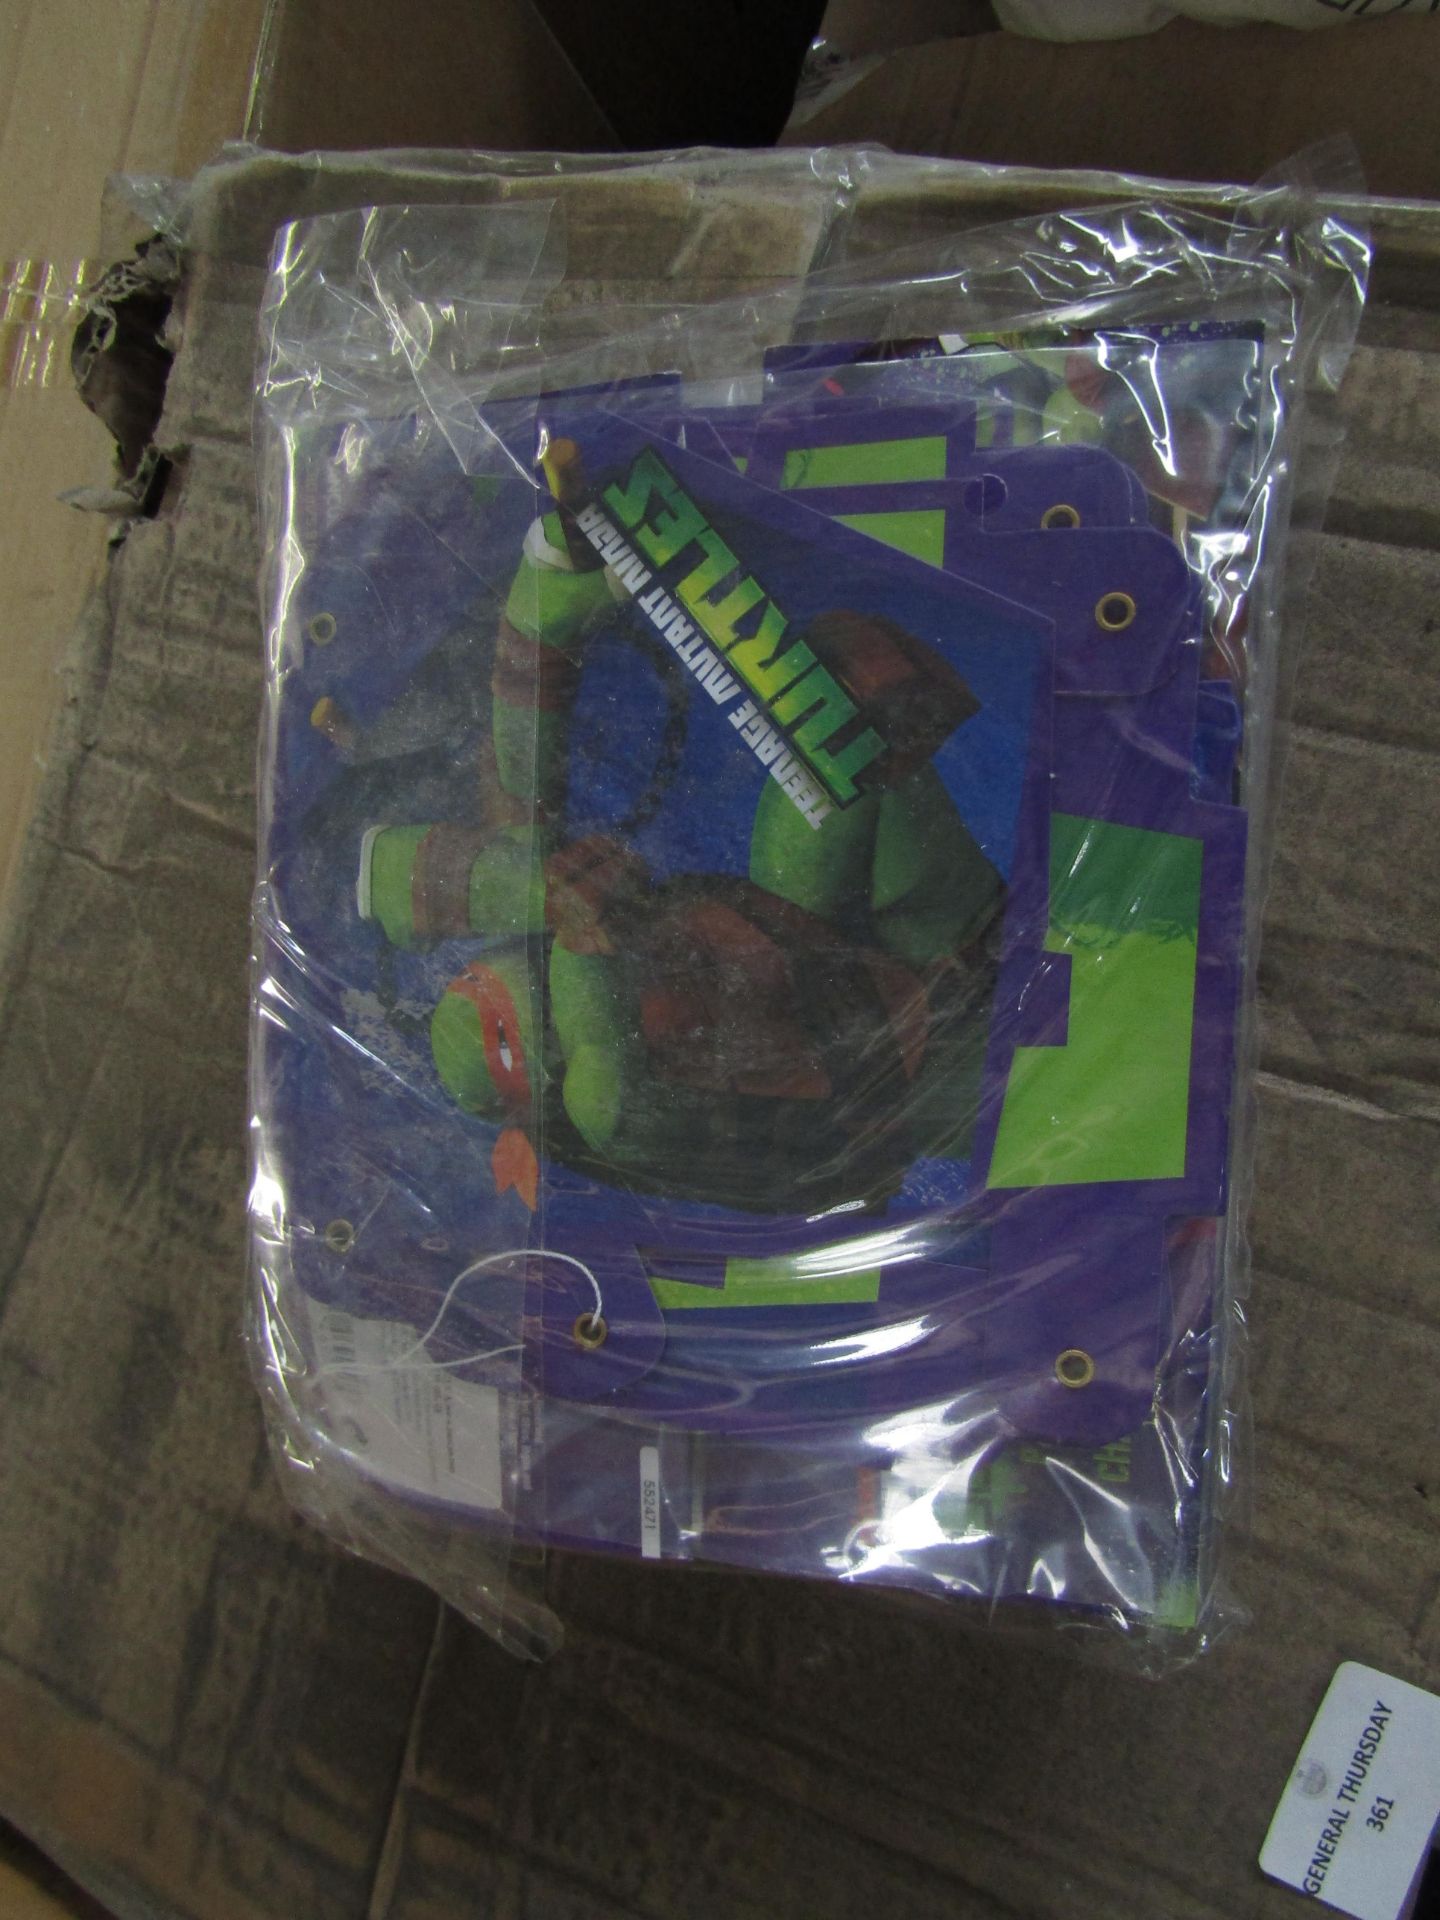 Box of approx 200 Ninja turtles party banners, all unused